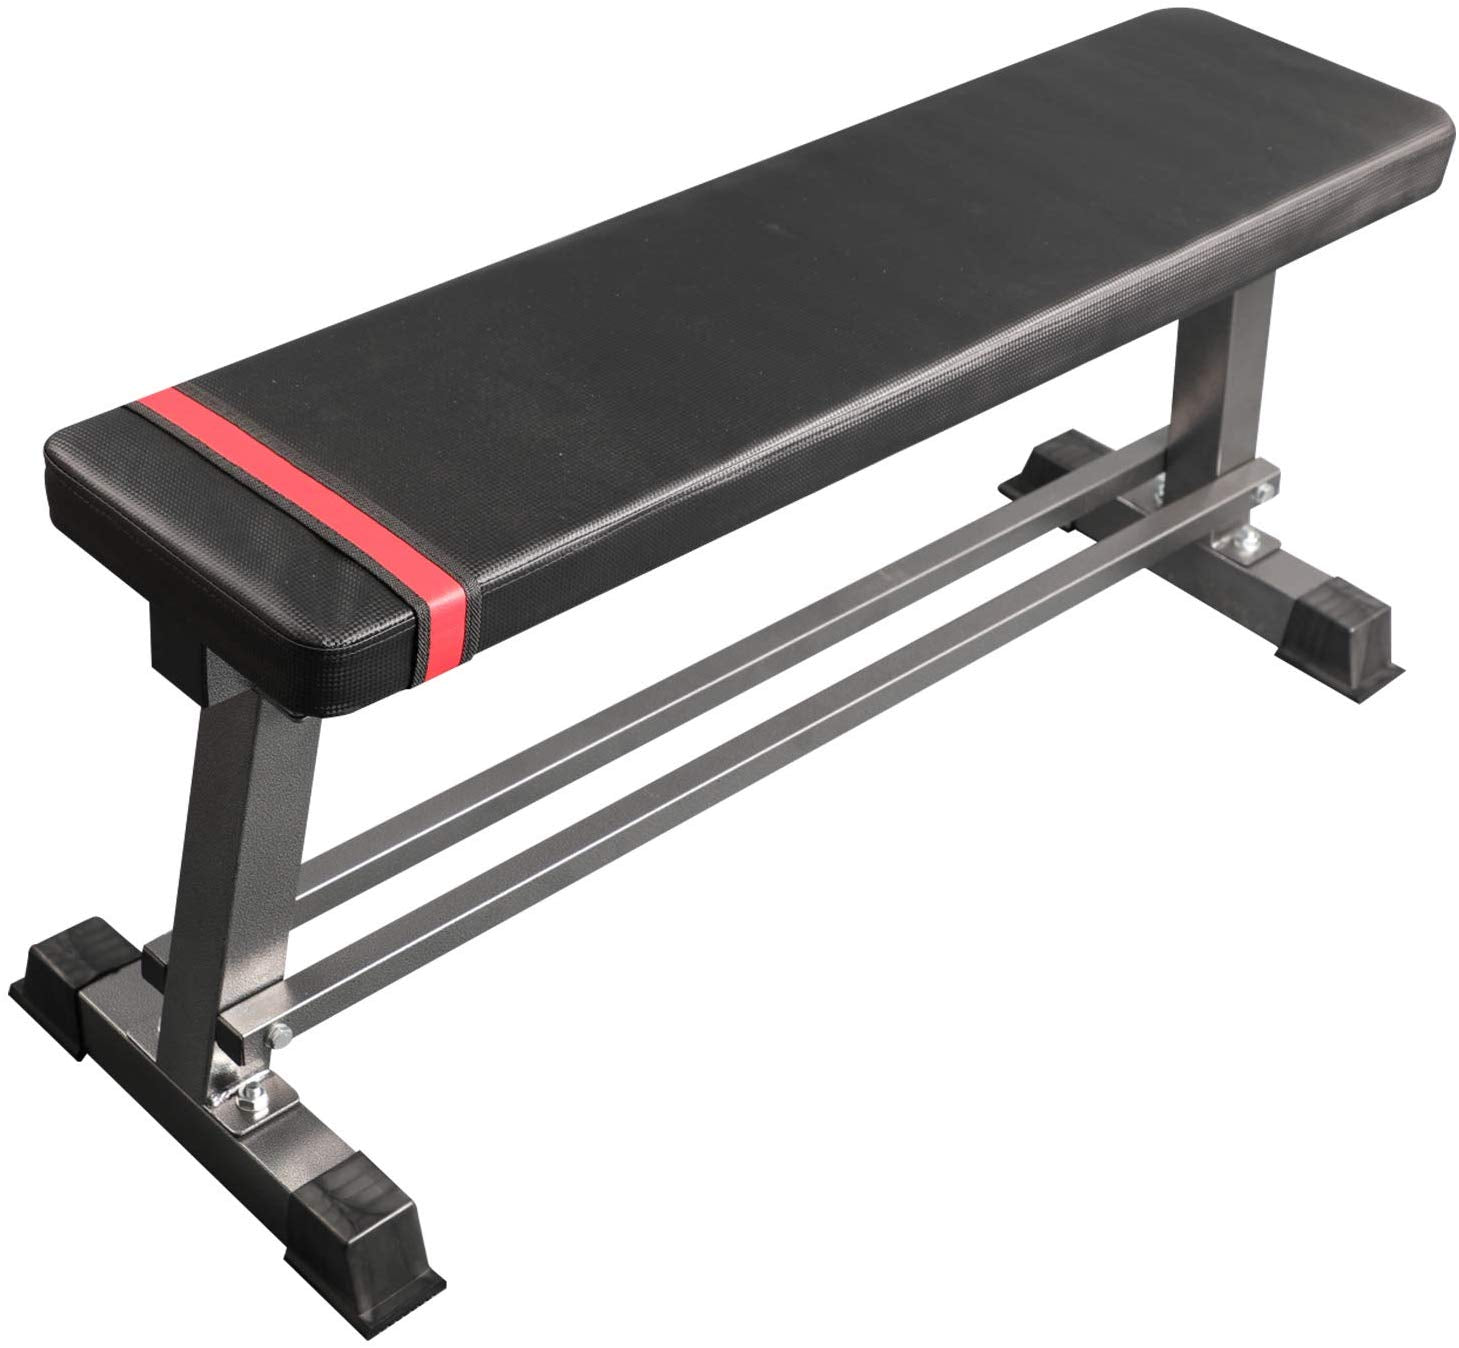 Fitness Maniac Standard Weight Training Benches Flat Utility Bench for and Ab Exercises